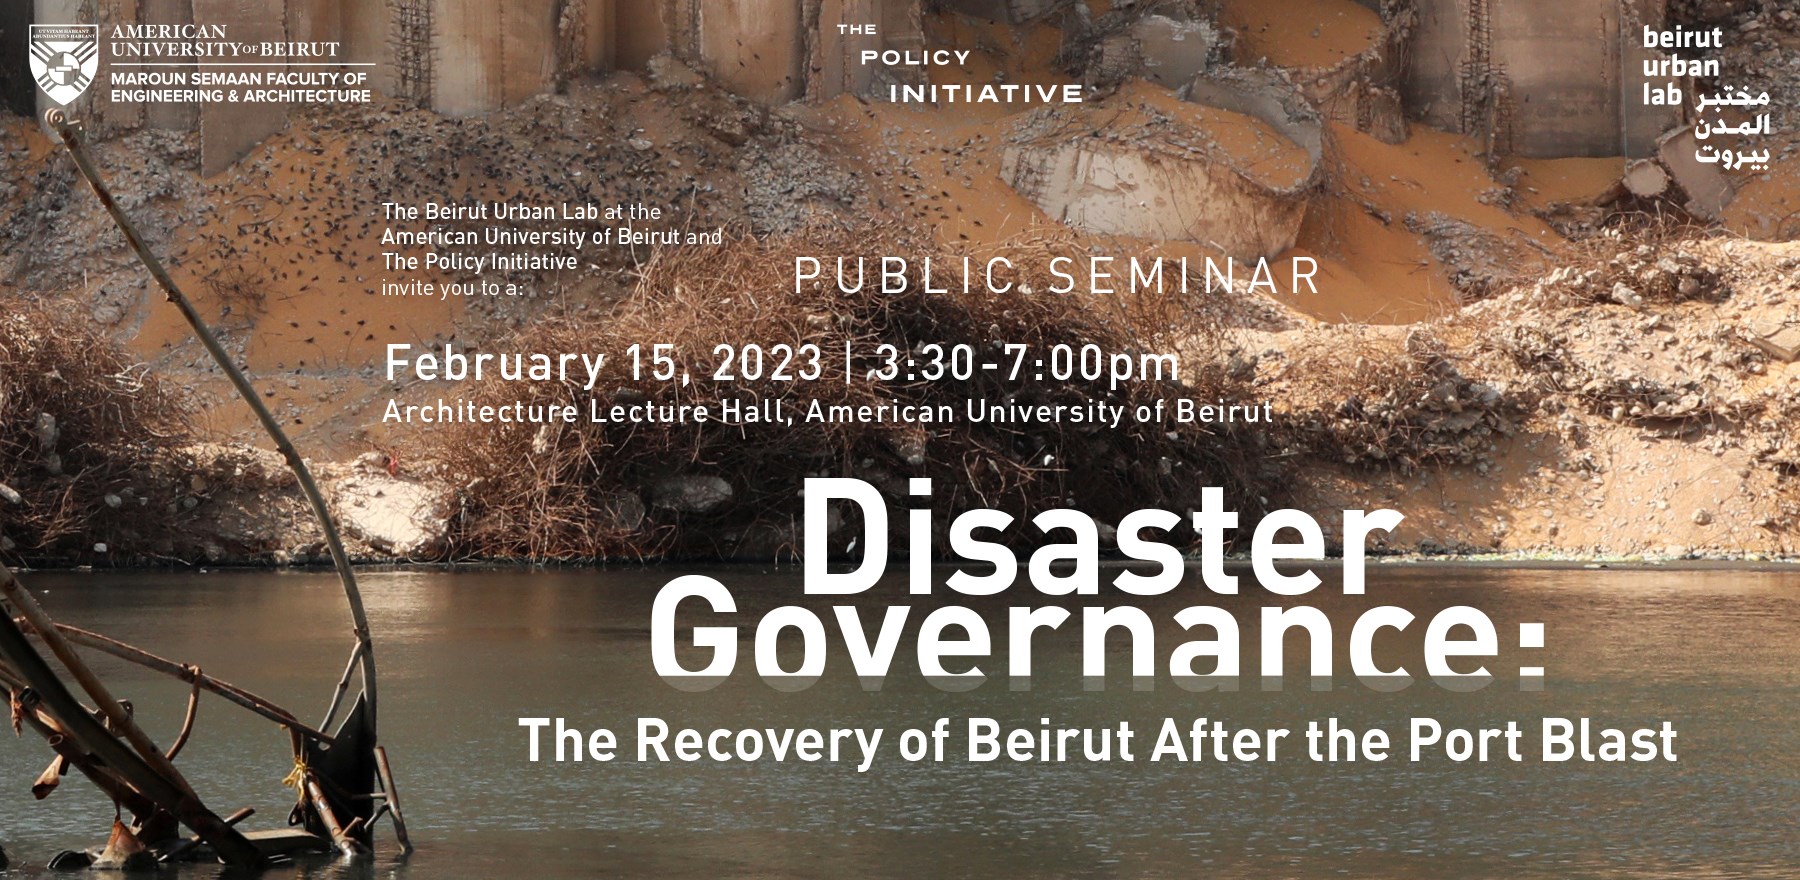 Disaster Governance: The Recovery of Beirut After the Port Blast